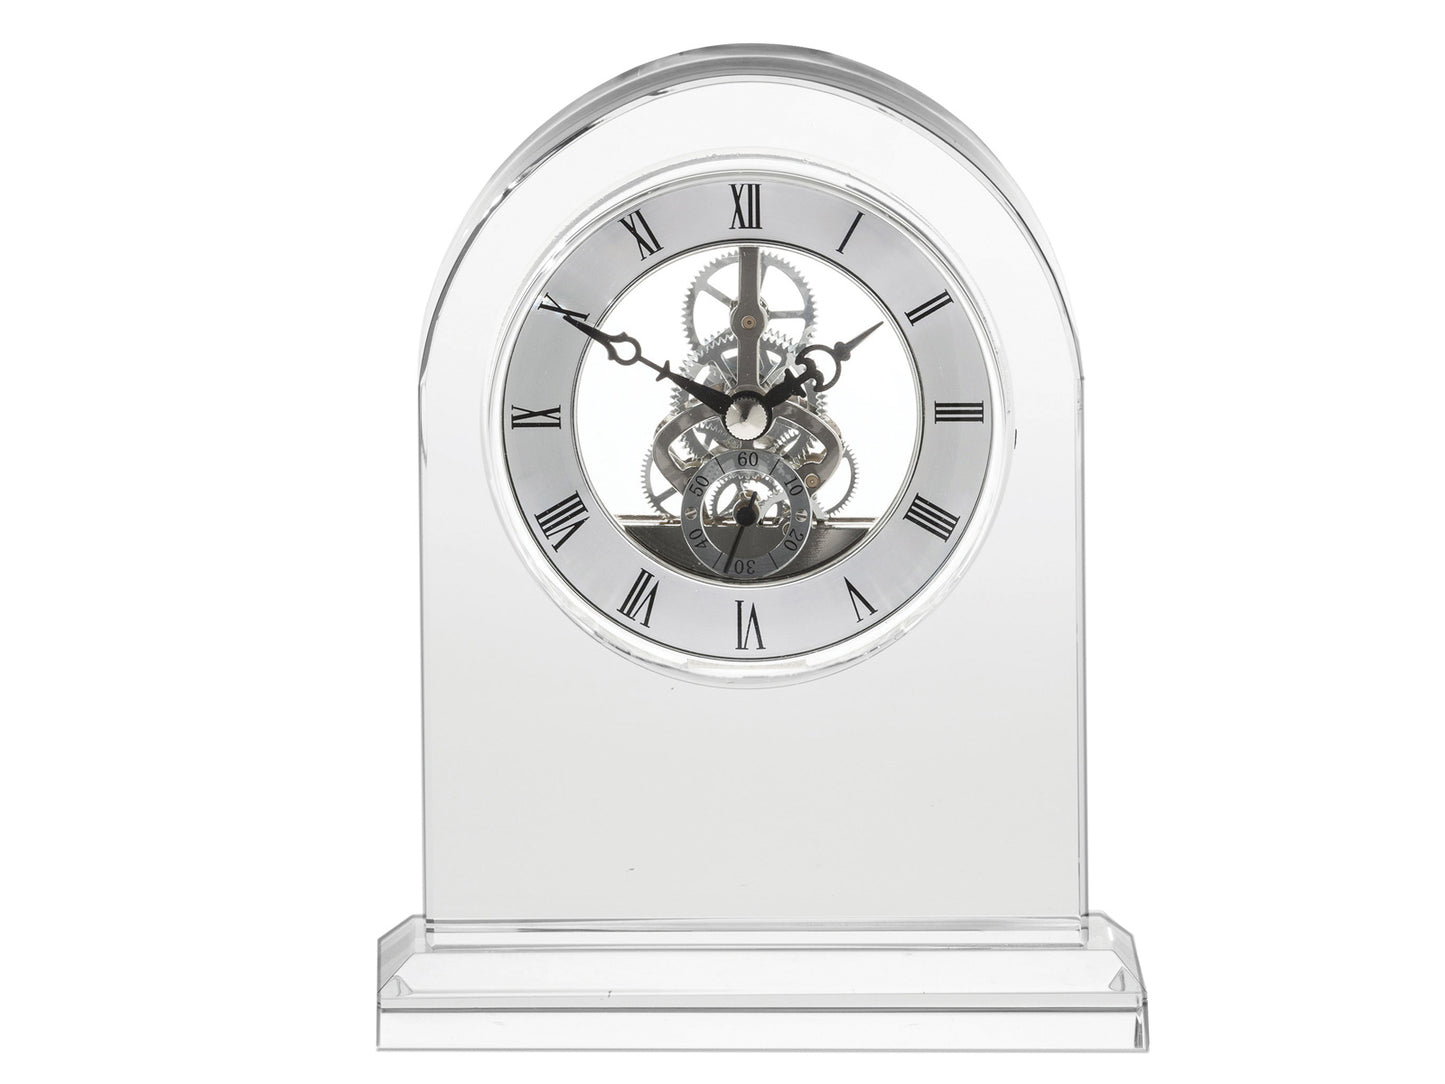 A large crystal clock with a stepped base, featuring an exposed movement behind the silver face